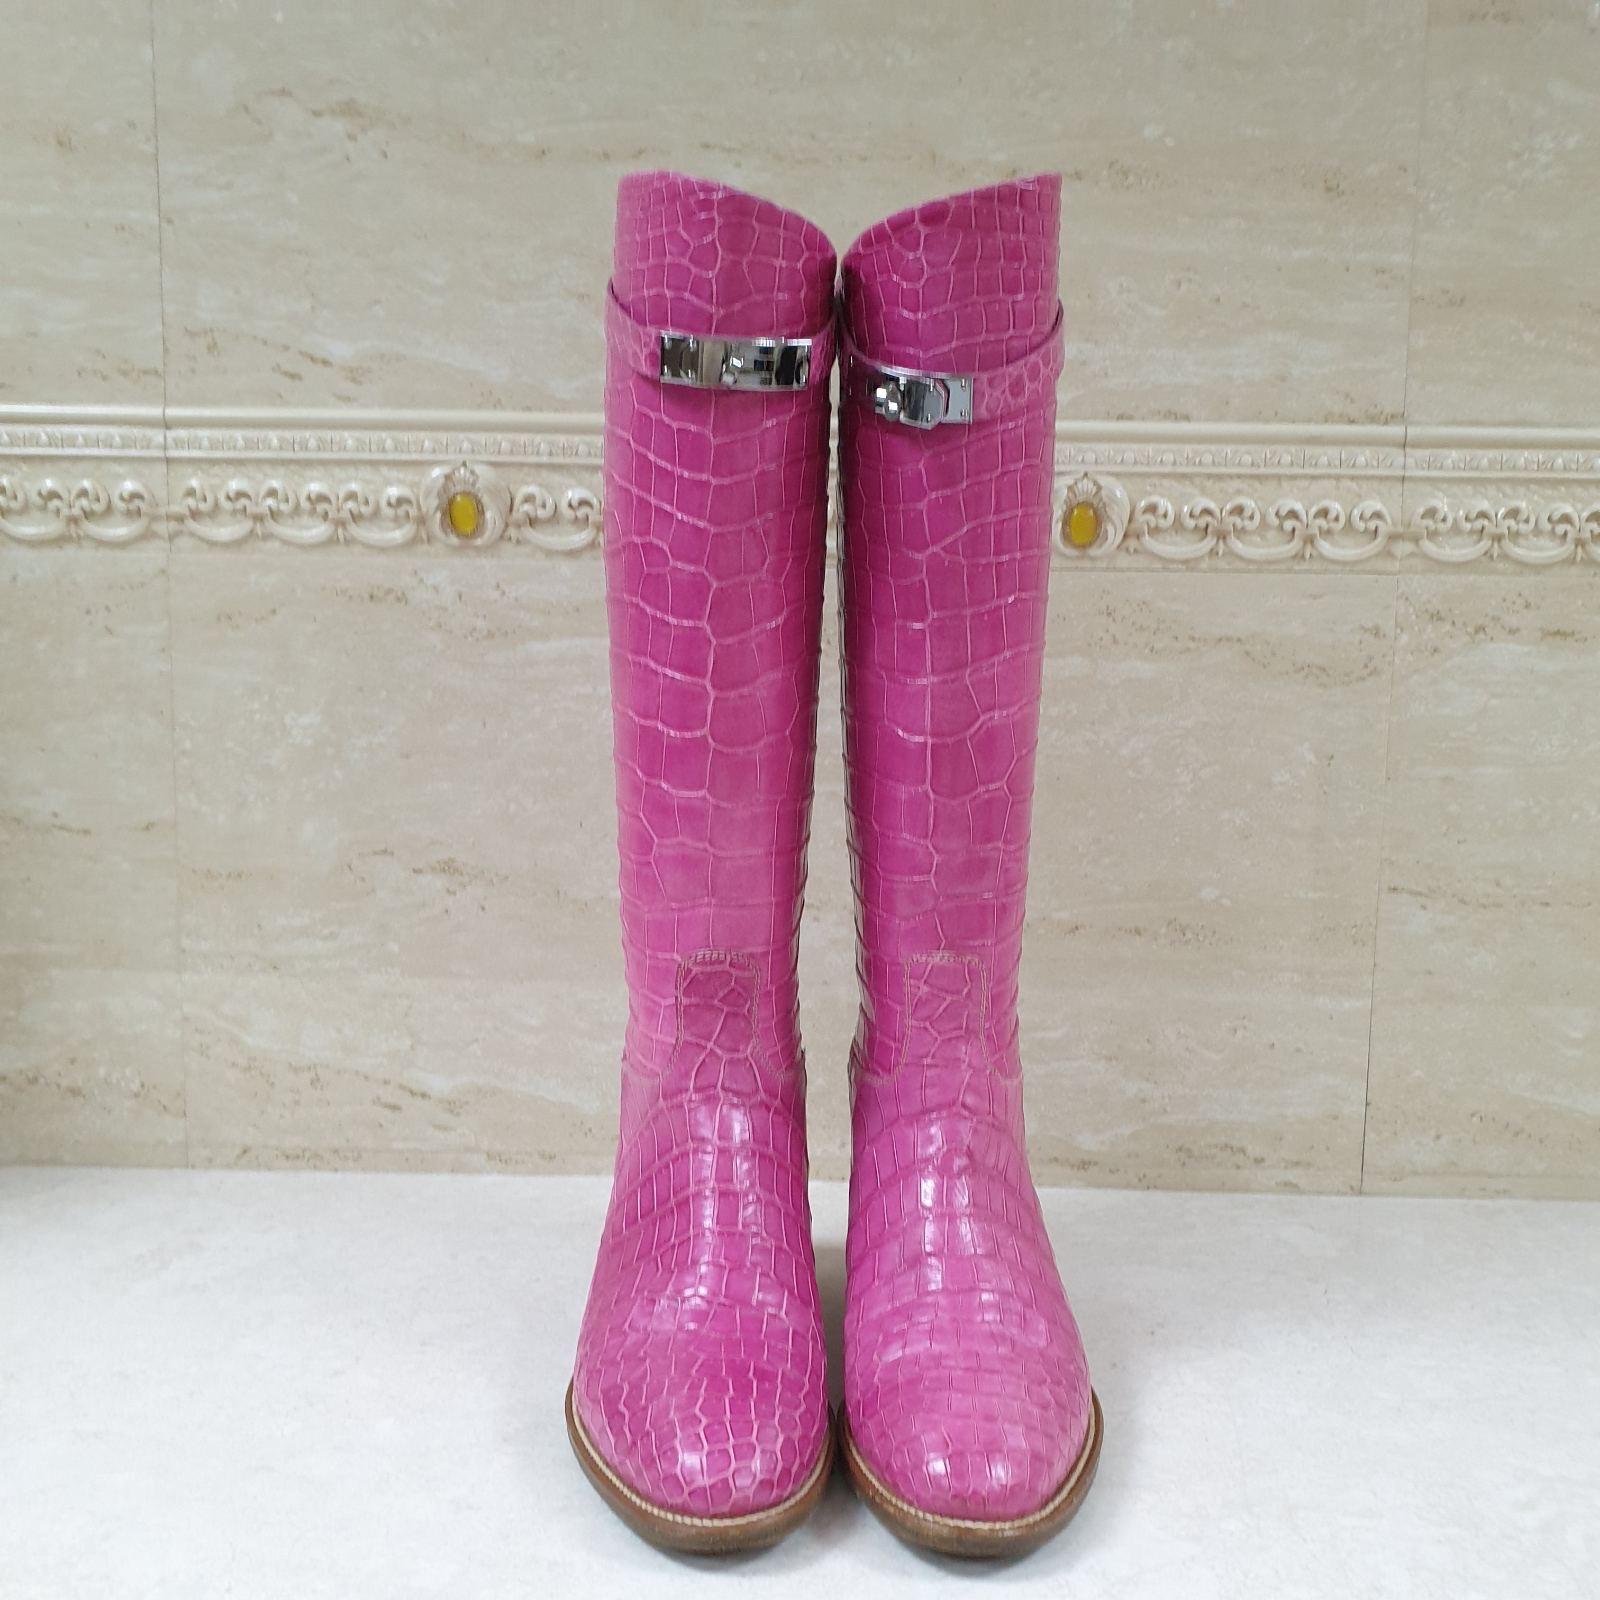 Pink alligator Hermès Jumping knee-high boots with round toes.
Palladium hardware.
Tonal stitching throughout.
Sstacked heels and Kelly straps featuring turn-lock closures at uppers.
Sz.37
Worn 3 times.
Very good condition.
No original